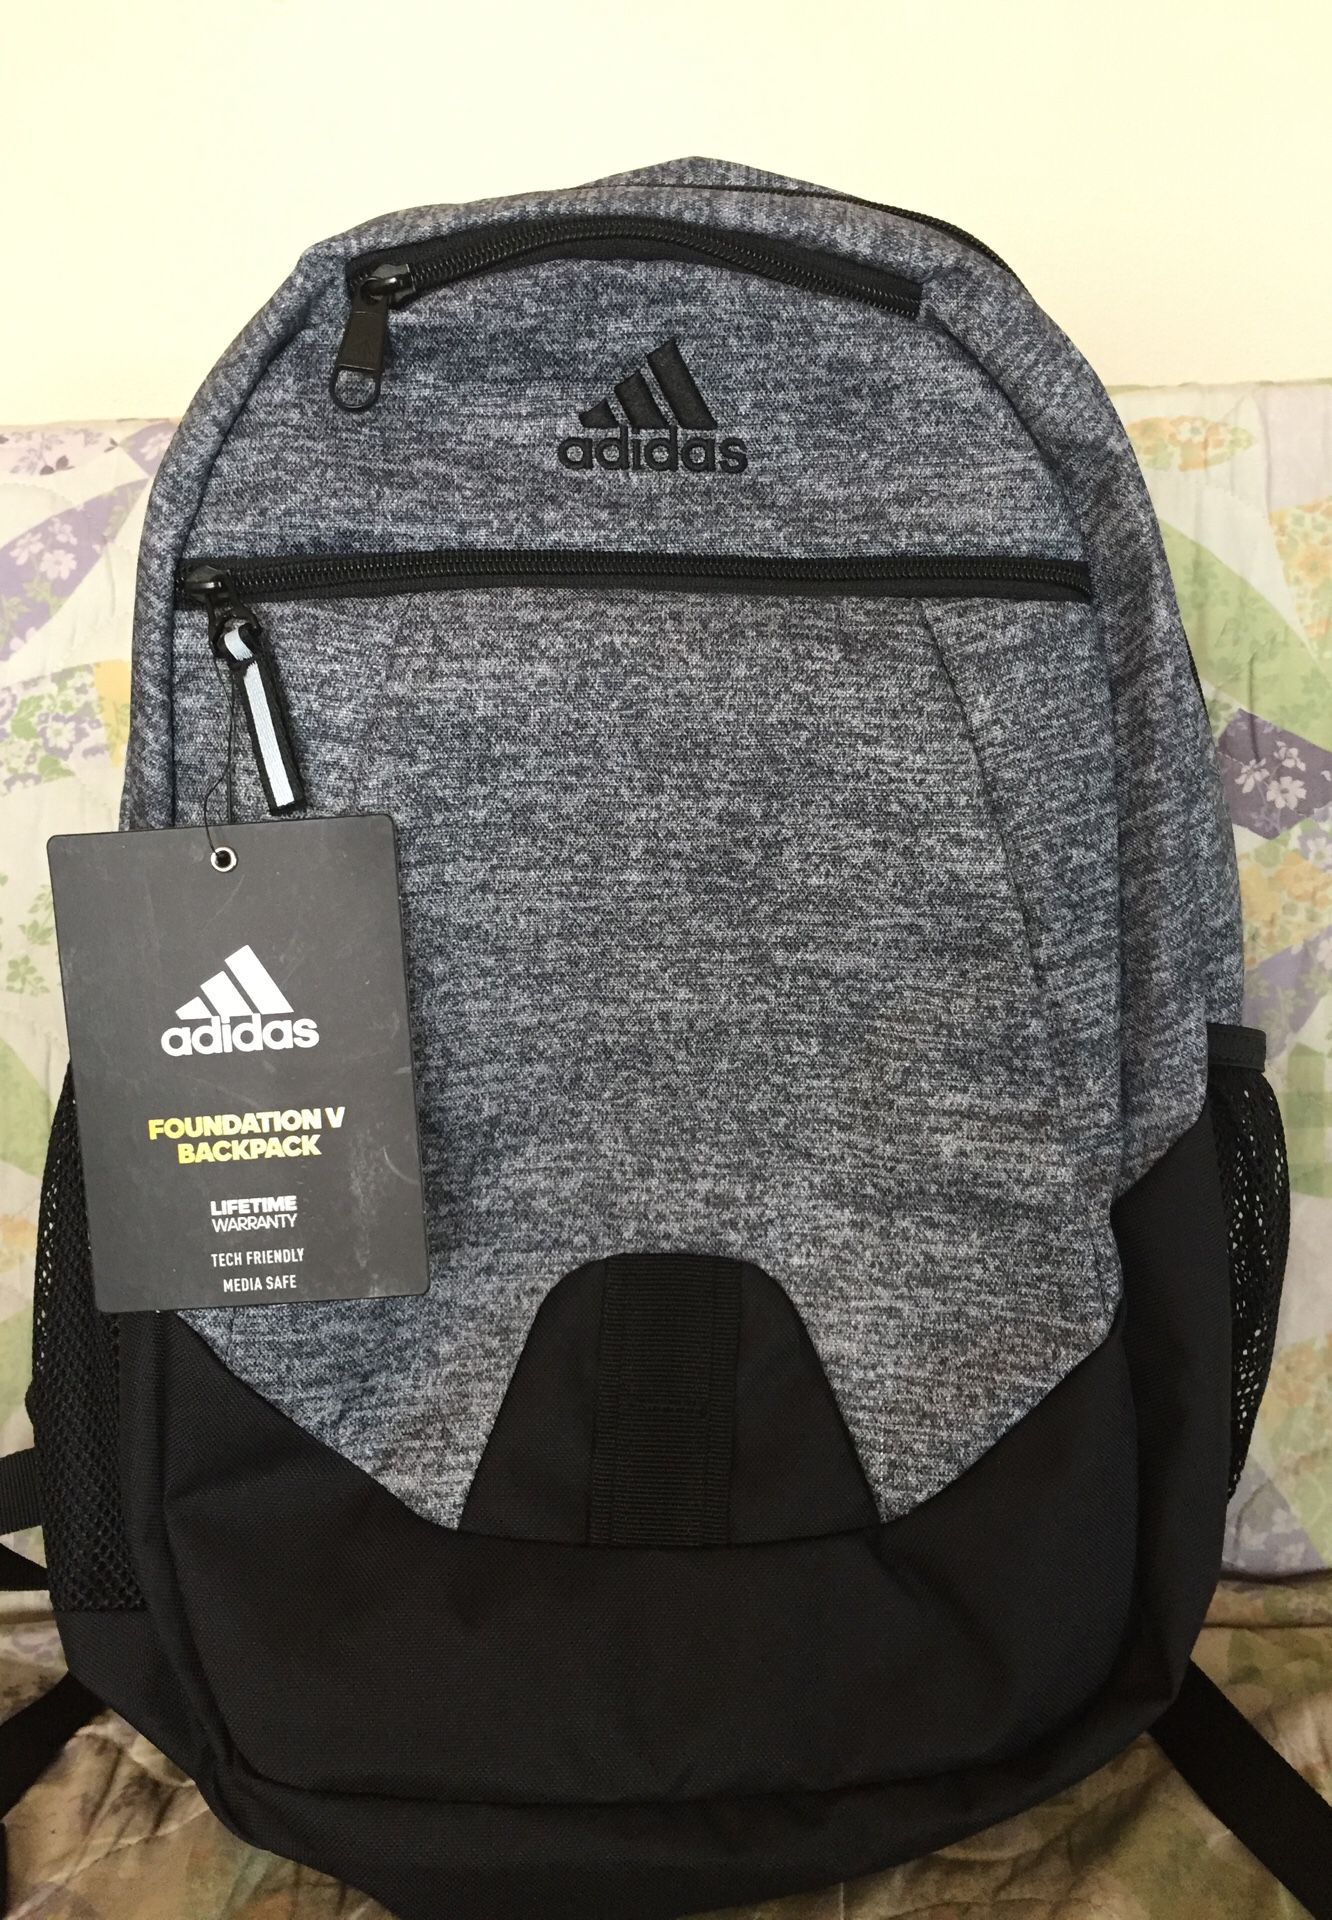 Brand new Adidas backpack (with tags)